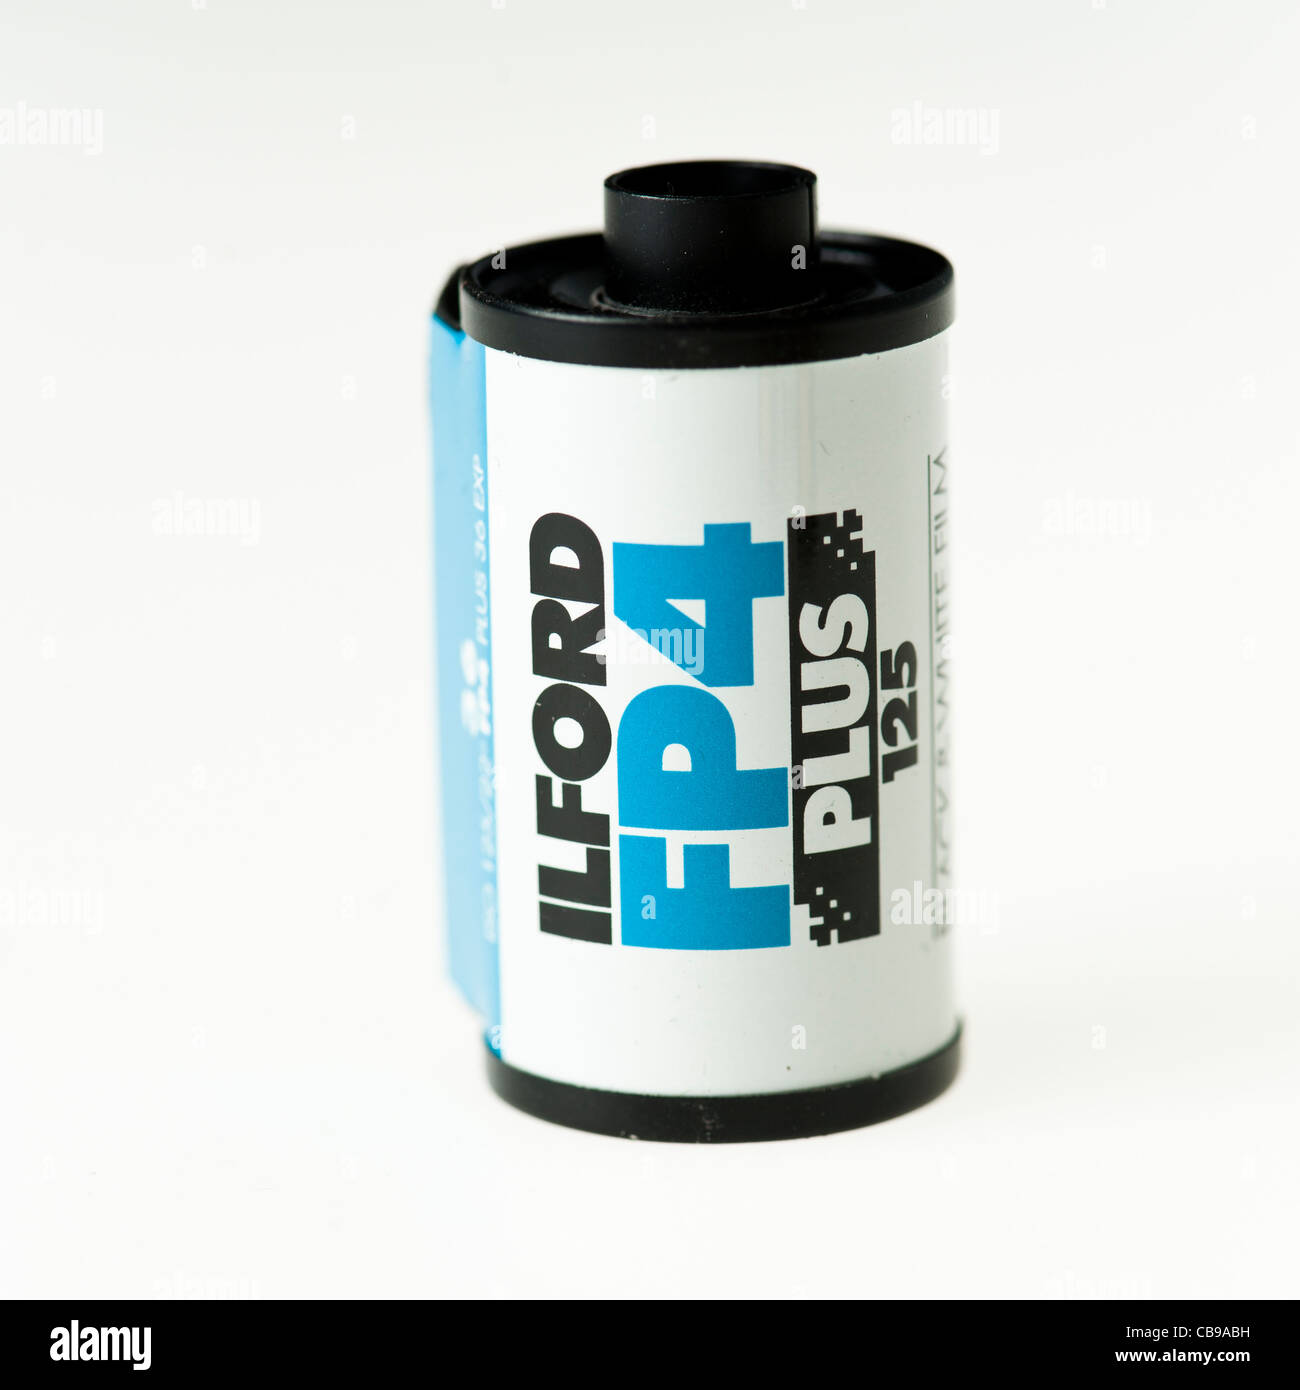 An ilford FP4 35mm black and white film canister roll Stock Photo